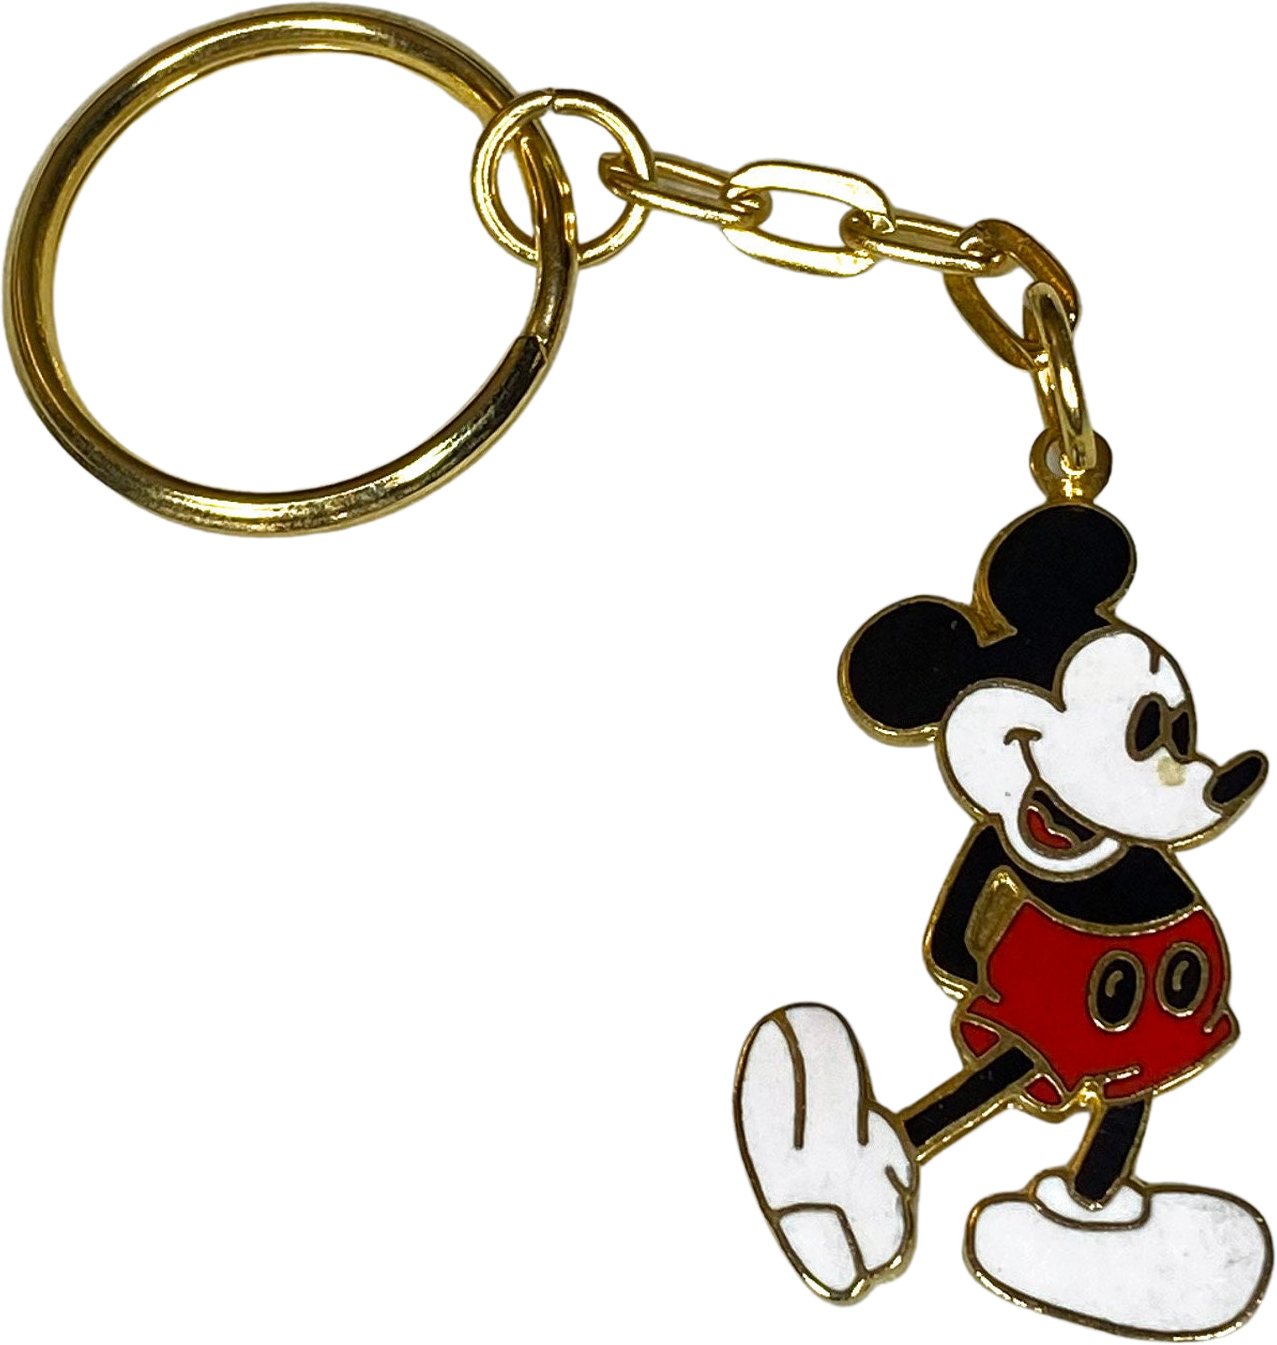 Vintage 80s Mickey Mouse Key Chain Enamel Over Gold Tone Metal by